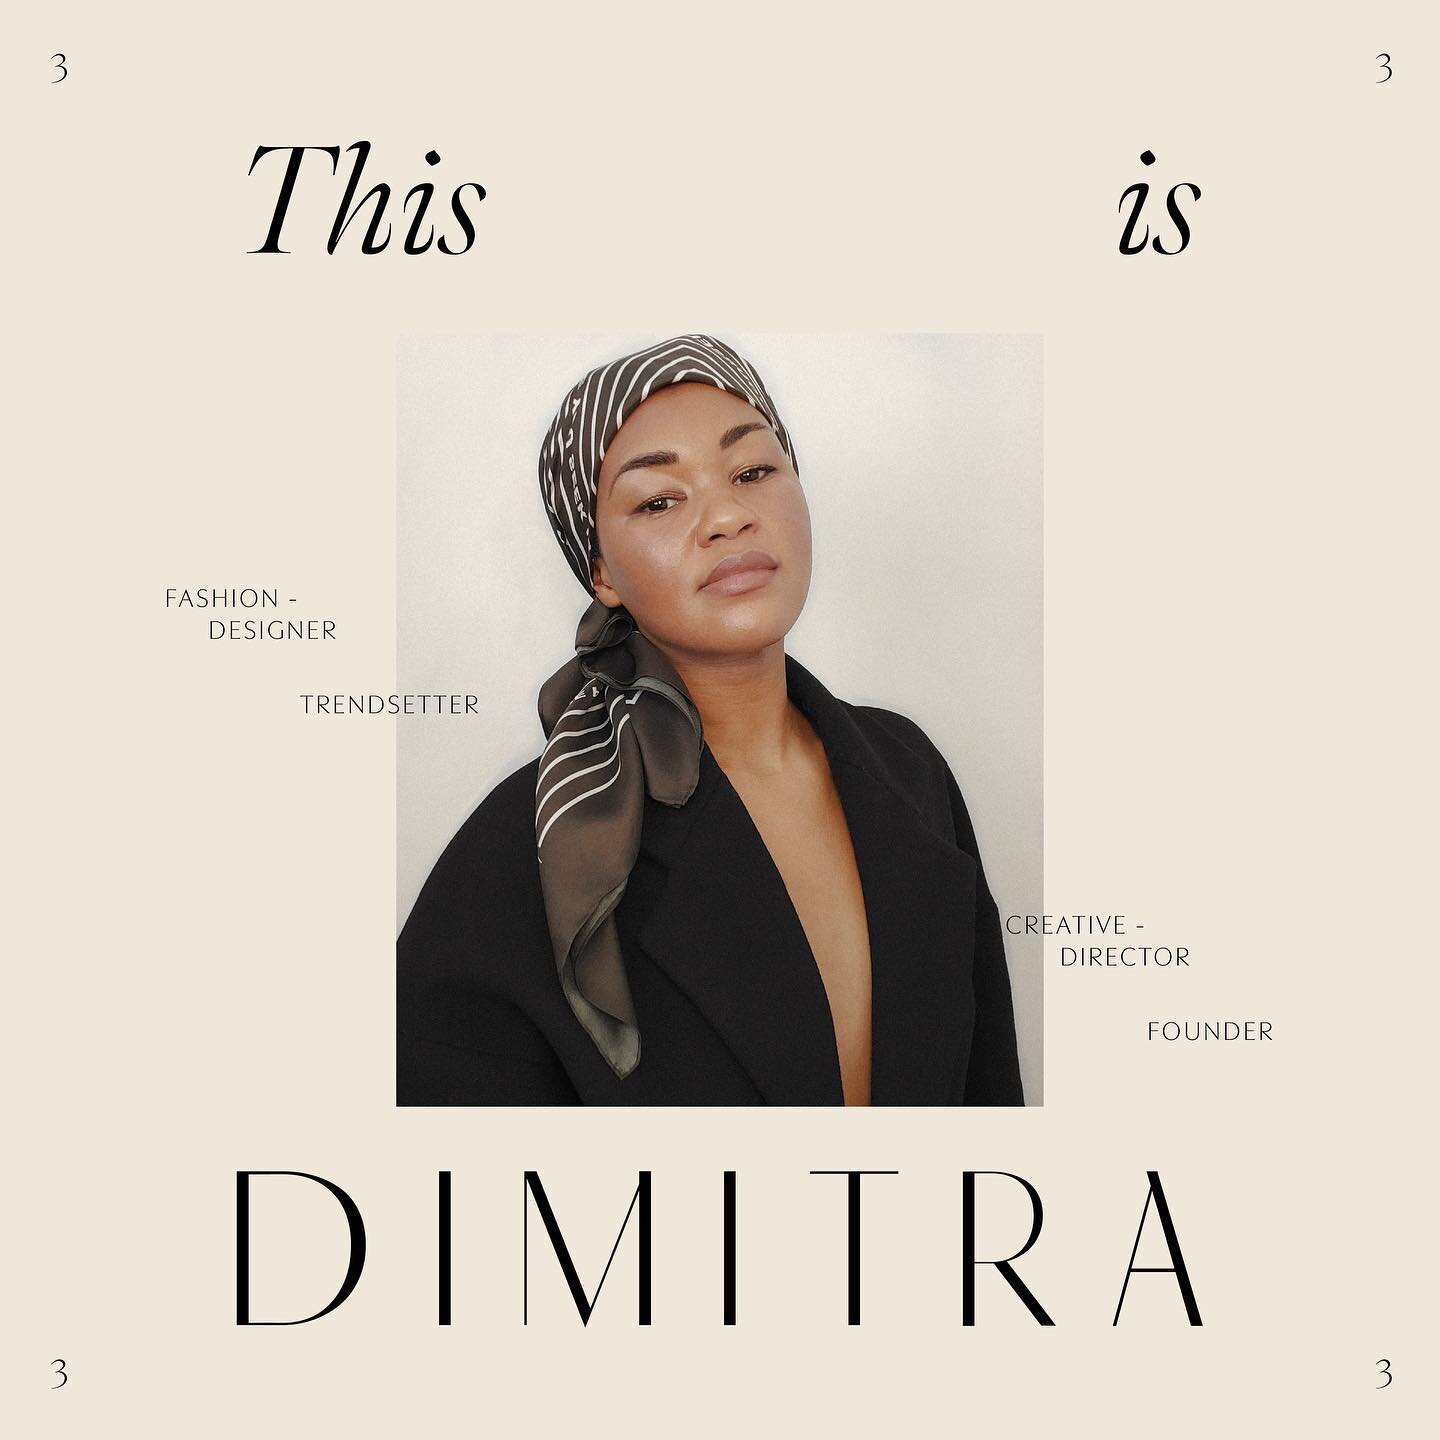 Meet Dimitra, the third and final feature in our series dedicated to recognizing and celebrating Black History Month.

We can think of no better creative to wrap-up our series than the woman behind @miitraofficial , a luxury accessory brand. Give Dim